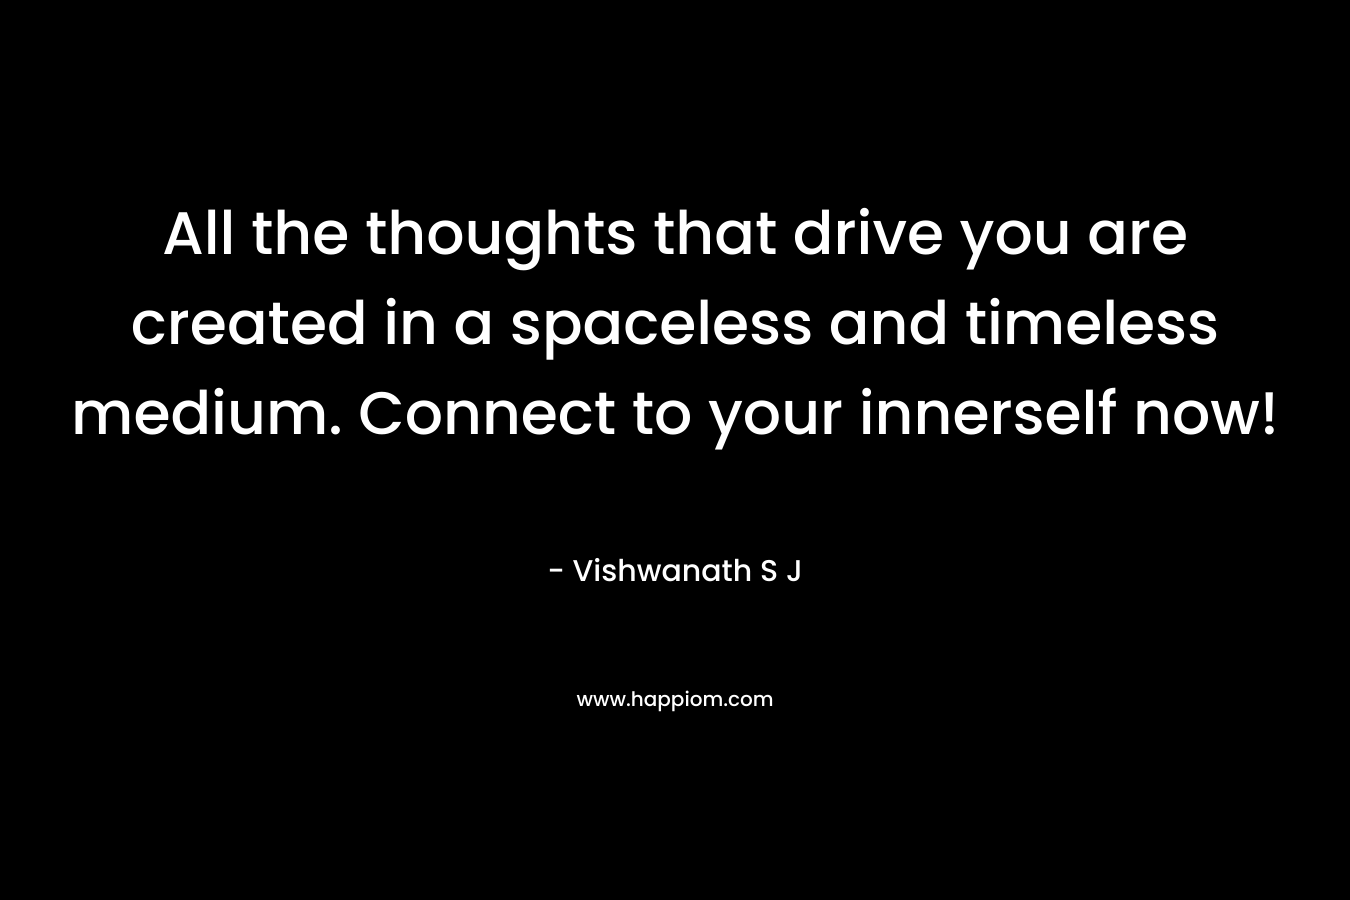 All the thoughts that drive you are created in a spaceless and timeless medium. Connect to your innerself now! – Vishwanath S J